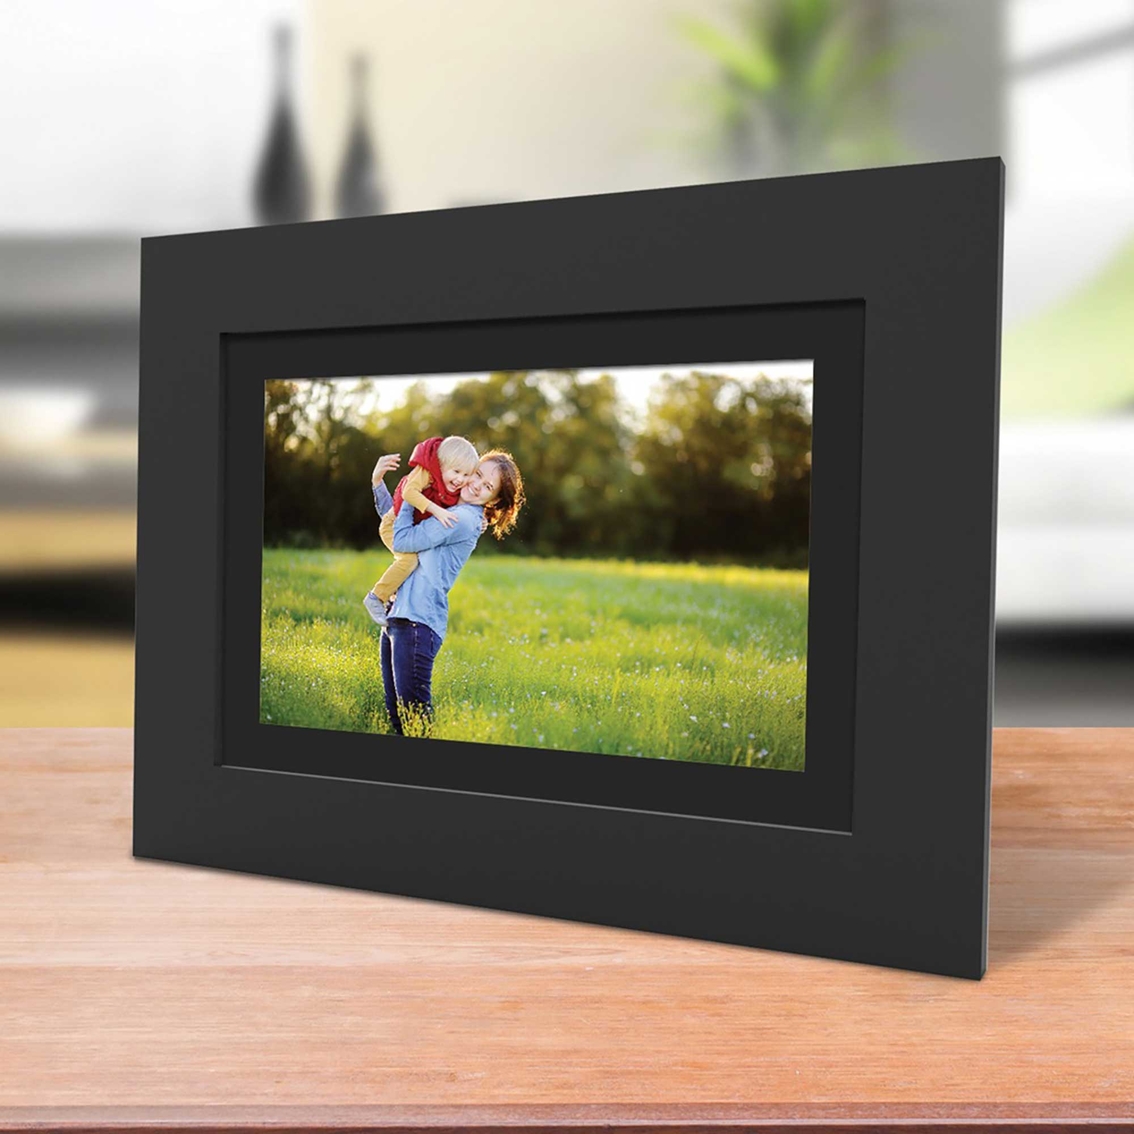 Brookstone 10.1-in. PhotoShare Friends and Family Cloud Frame - Image 8 of 9